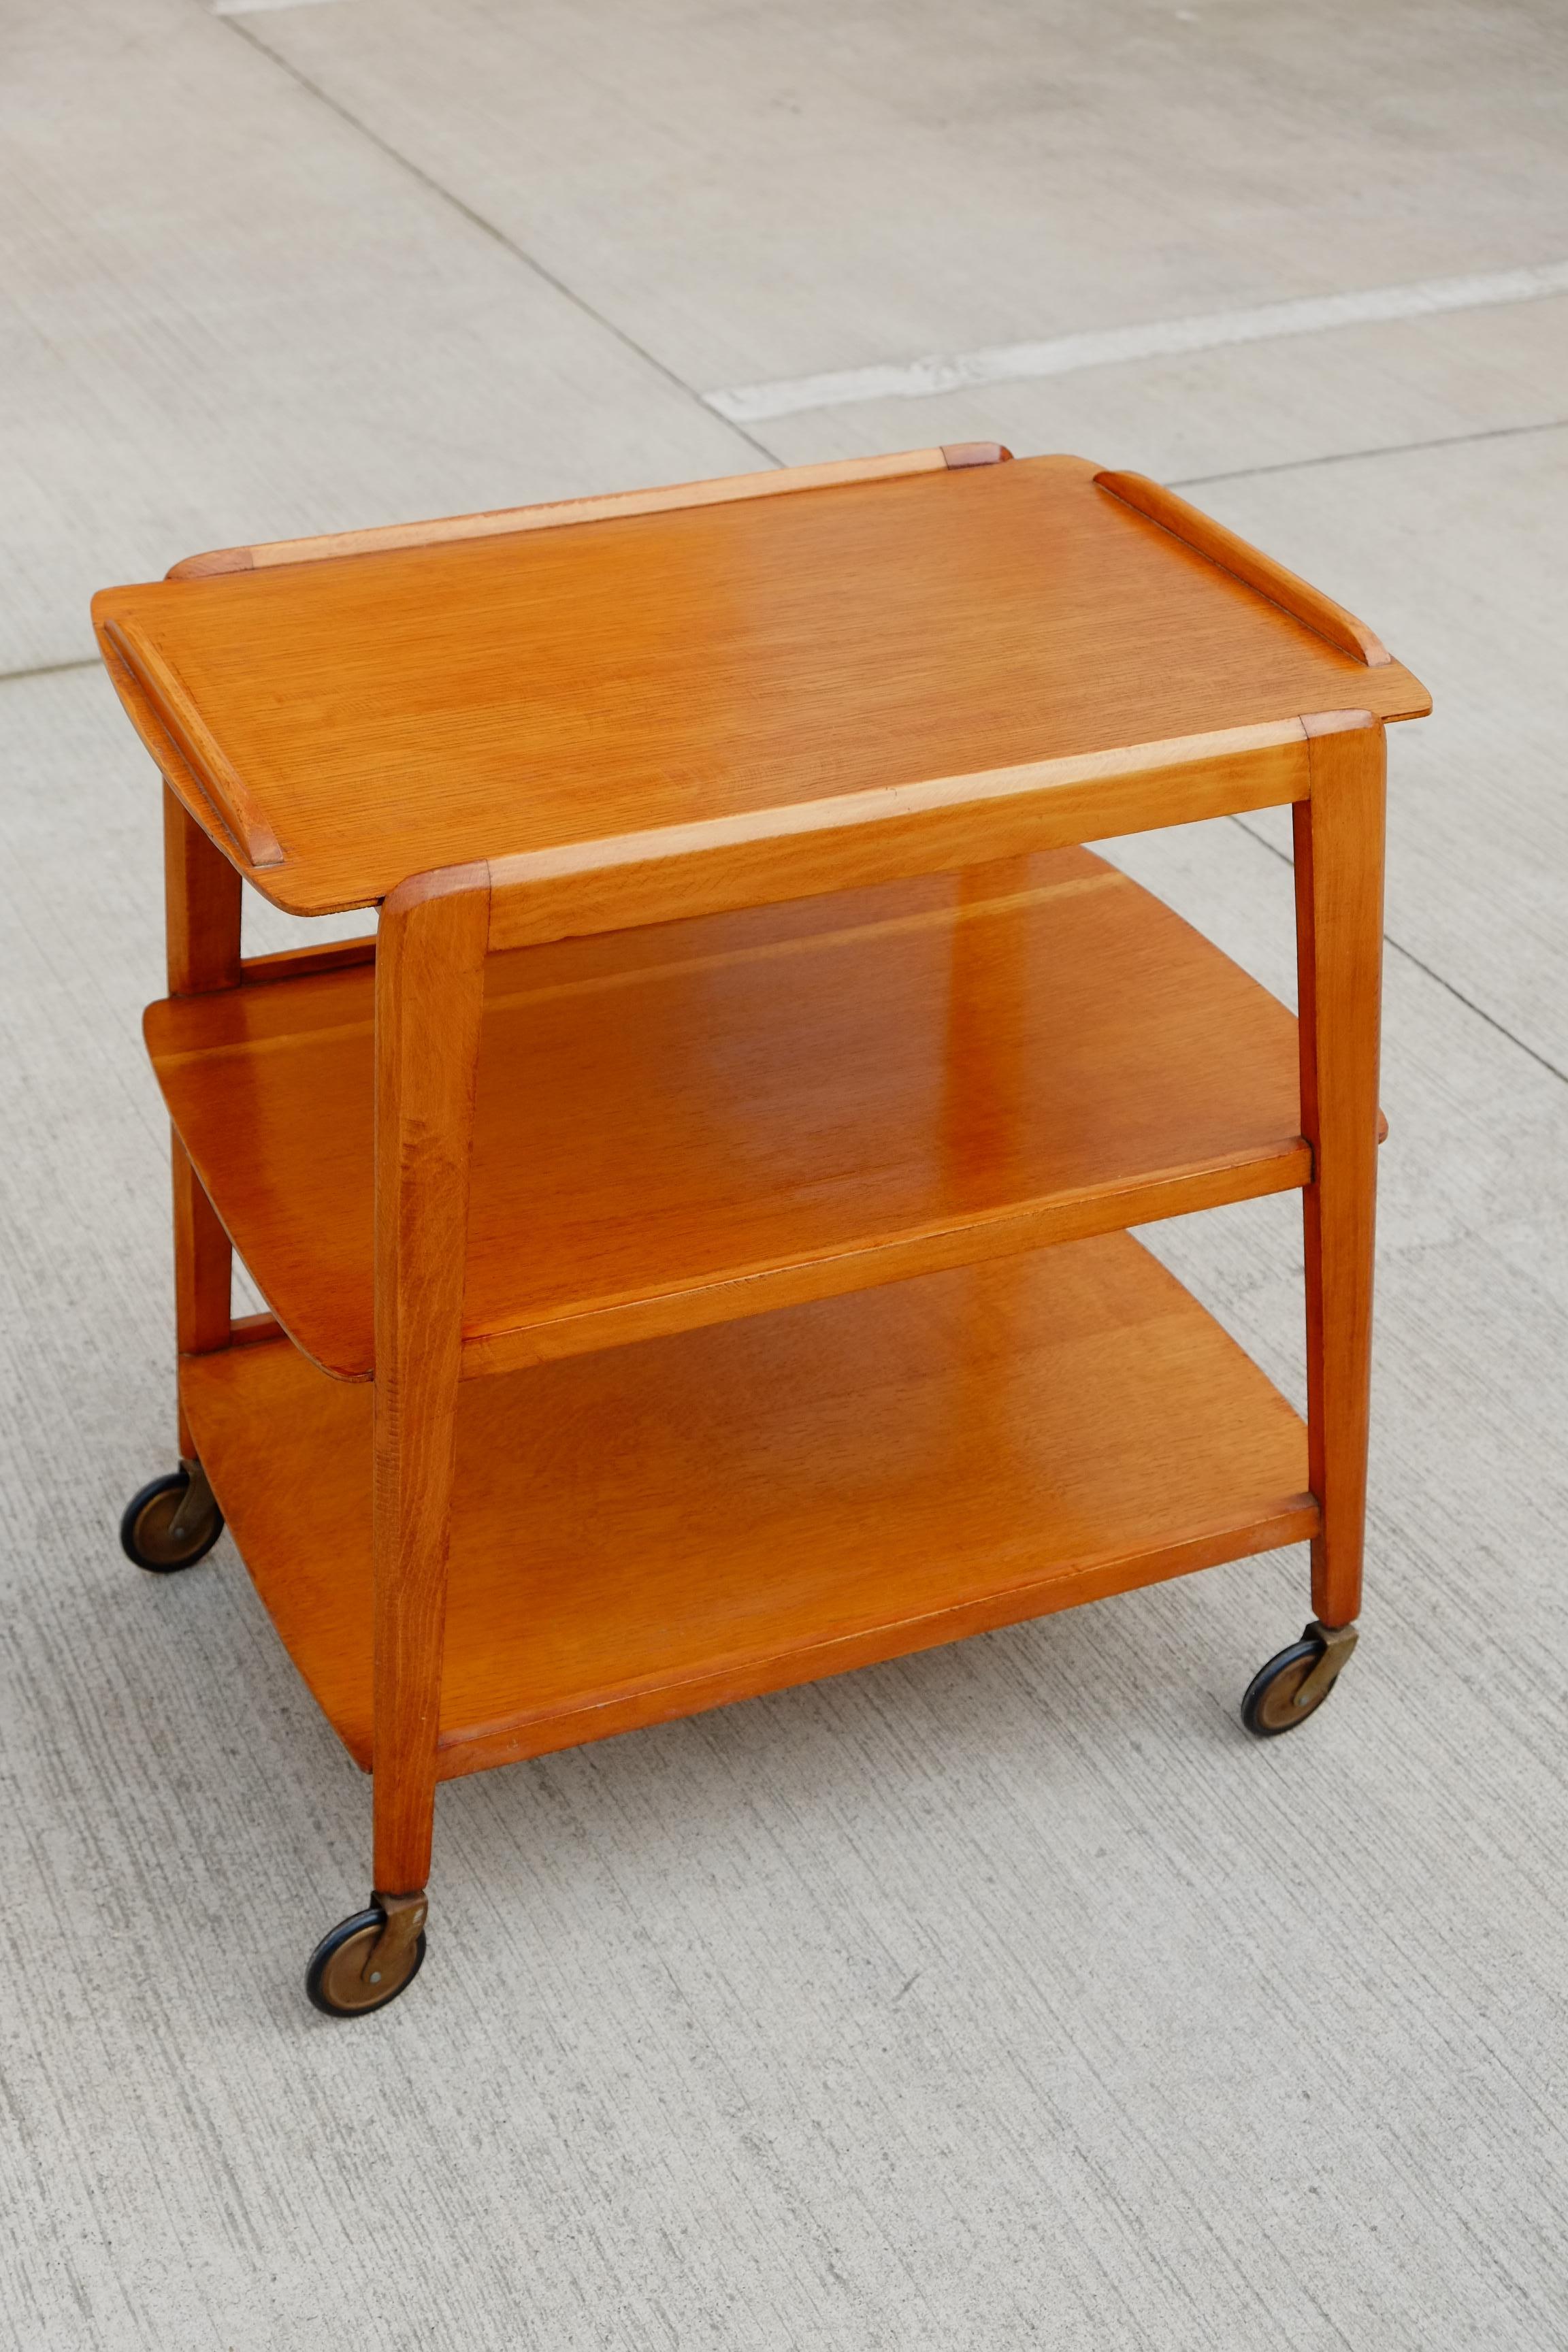 A nice Mid-Century Modern teak trolley cart from the 1960s. The trolley has a gorgeous angular shape which is wider at the bottom and narrows to the table top. angular lipped trays in a rich teak colour wood. Large rubber wheels. A stylish serving